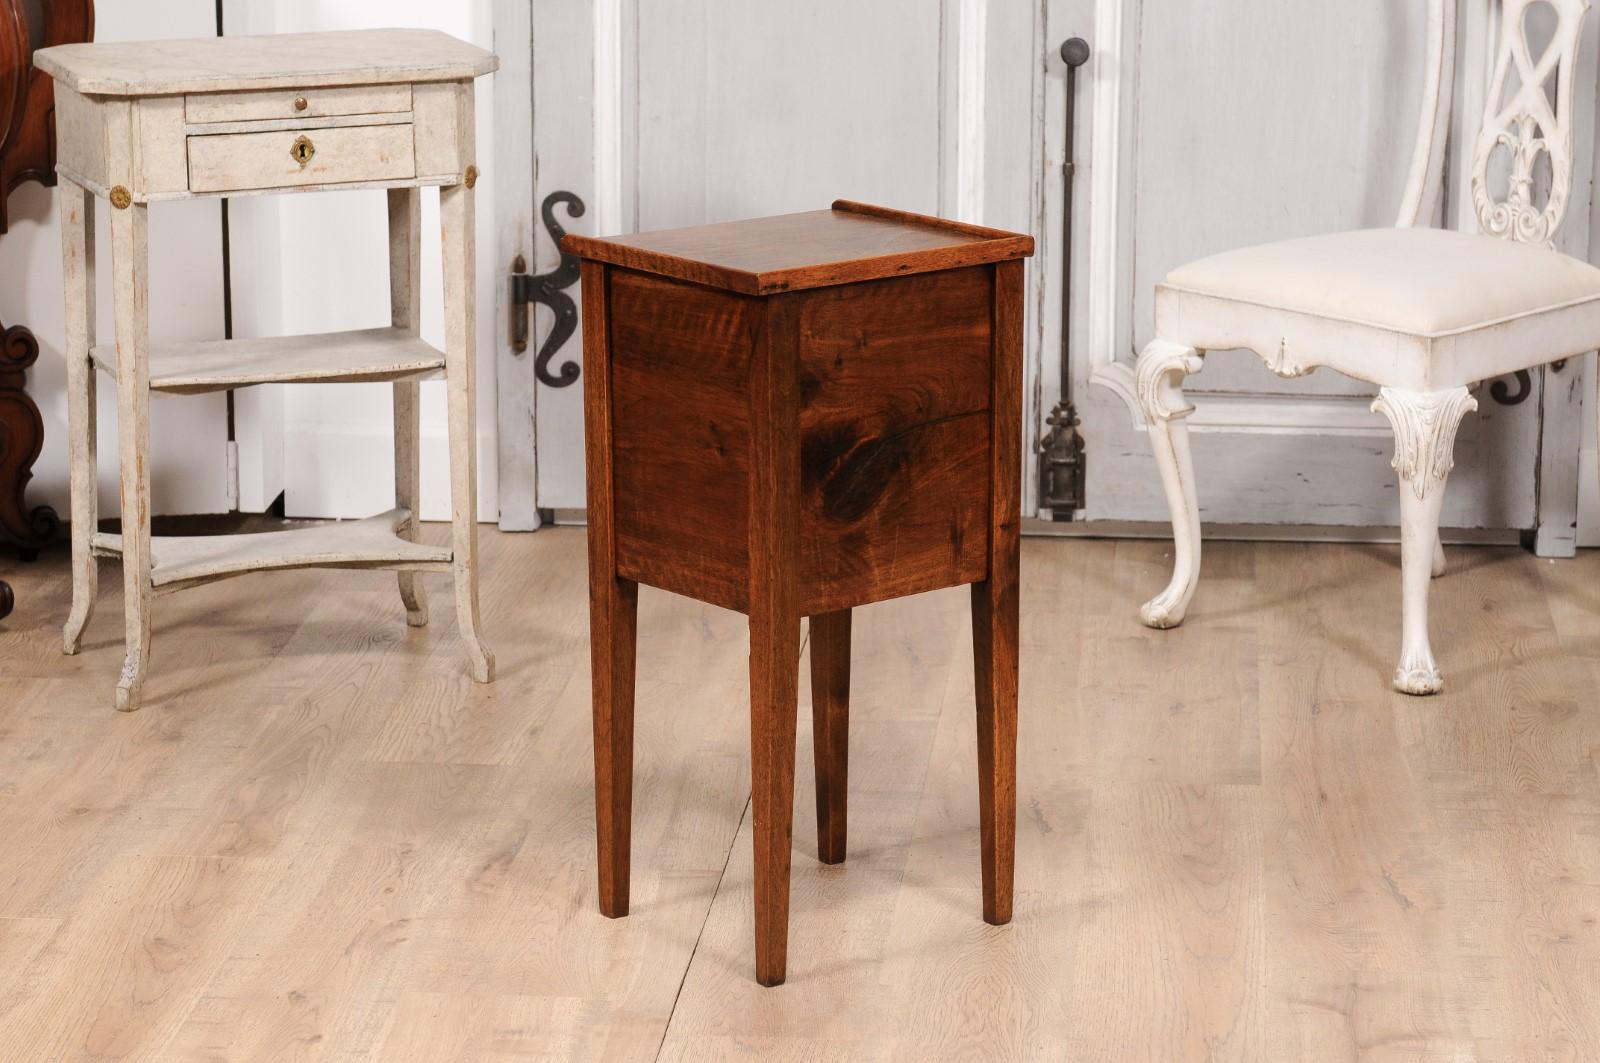 18th Century Italian Walnut Bedside Table with Single Drawer and Tambour Door For Sale 6